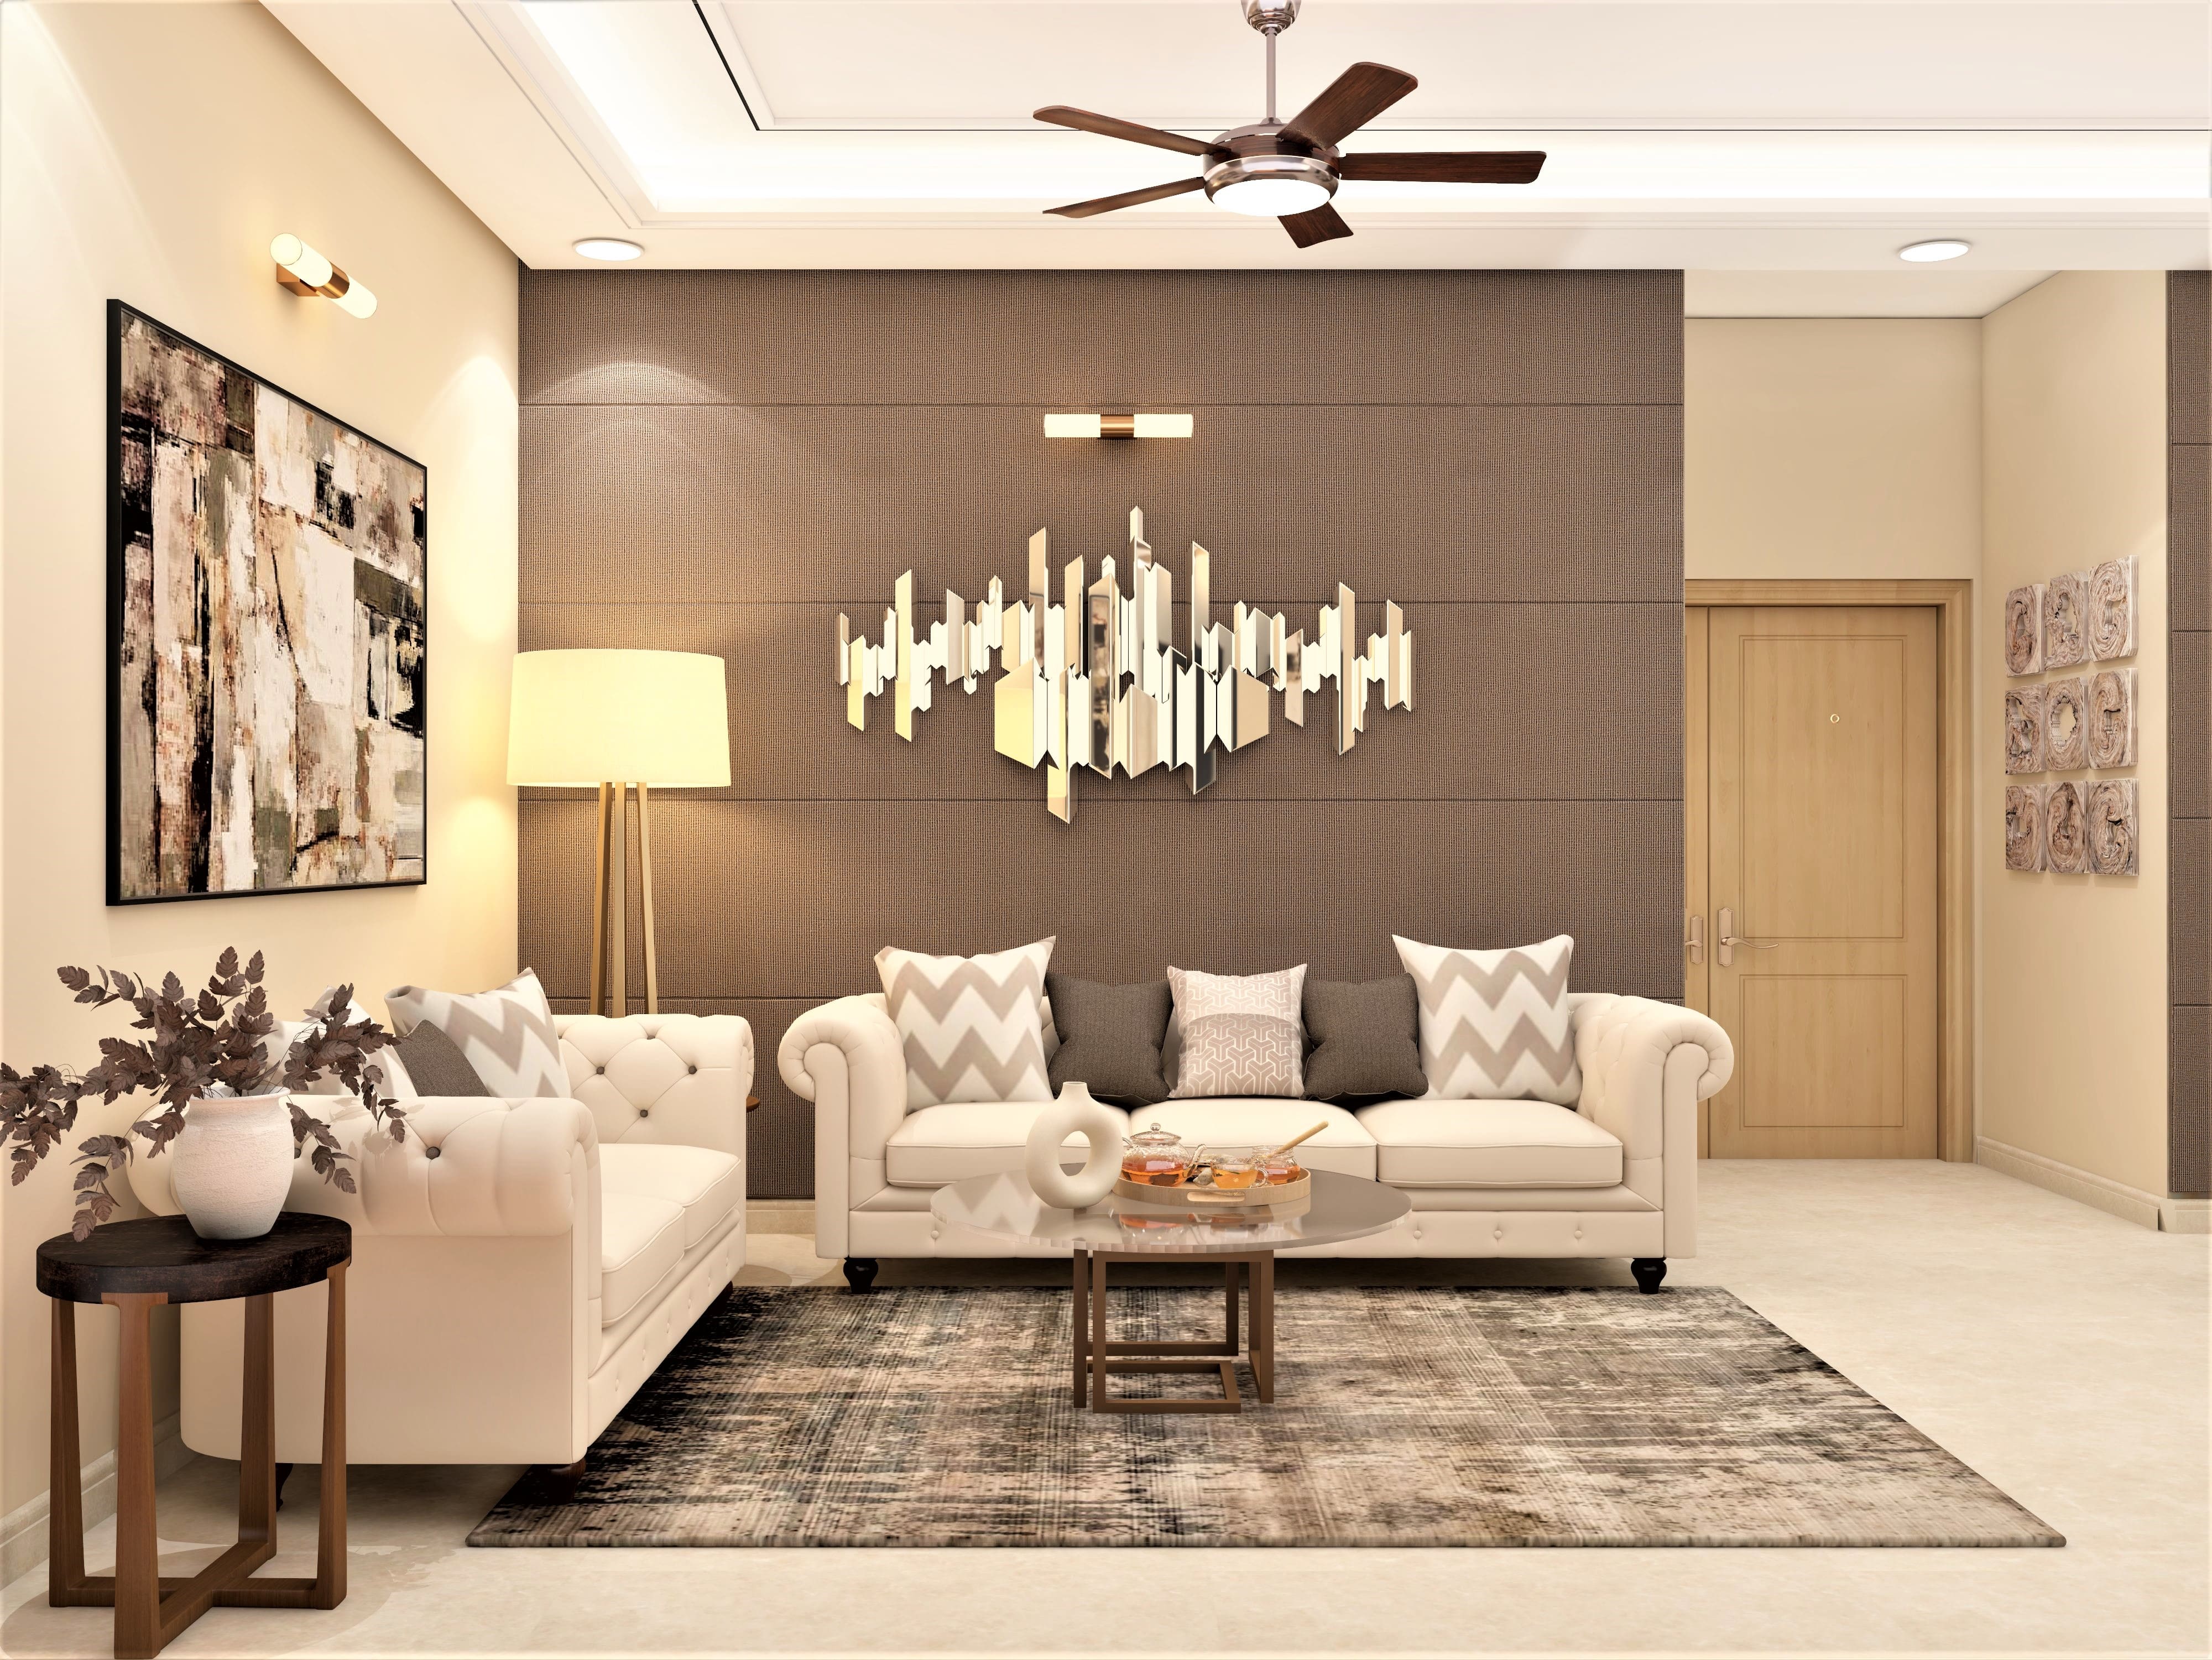 Neutral & muted tone living room design to uplift your home interior - Beautiful Homes